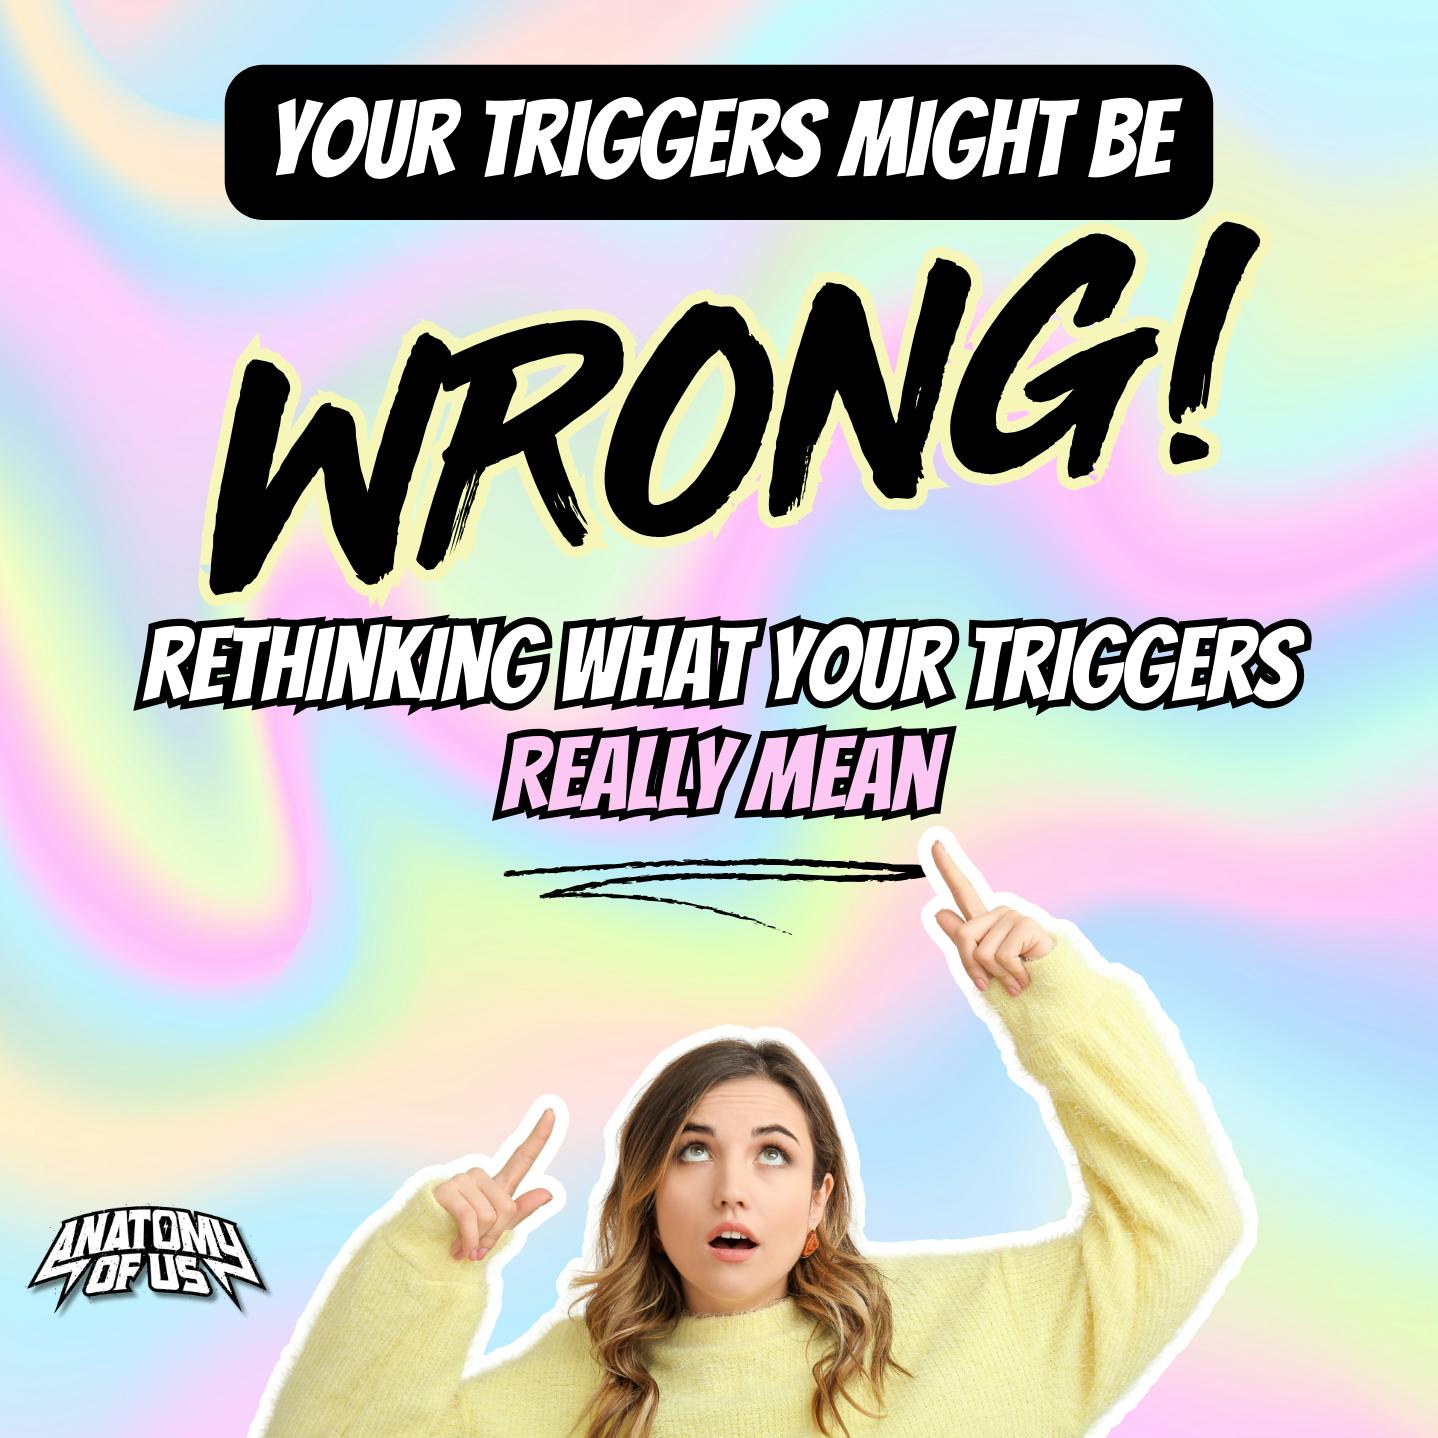 Your Triggers Might be WRONG! Rethinking what your triggers REALLY mean.